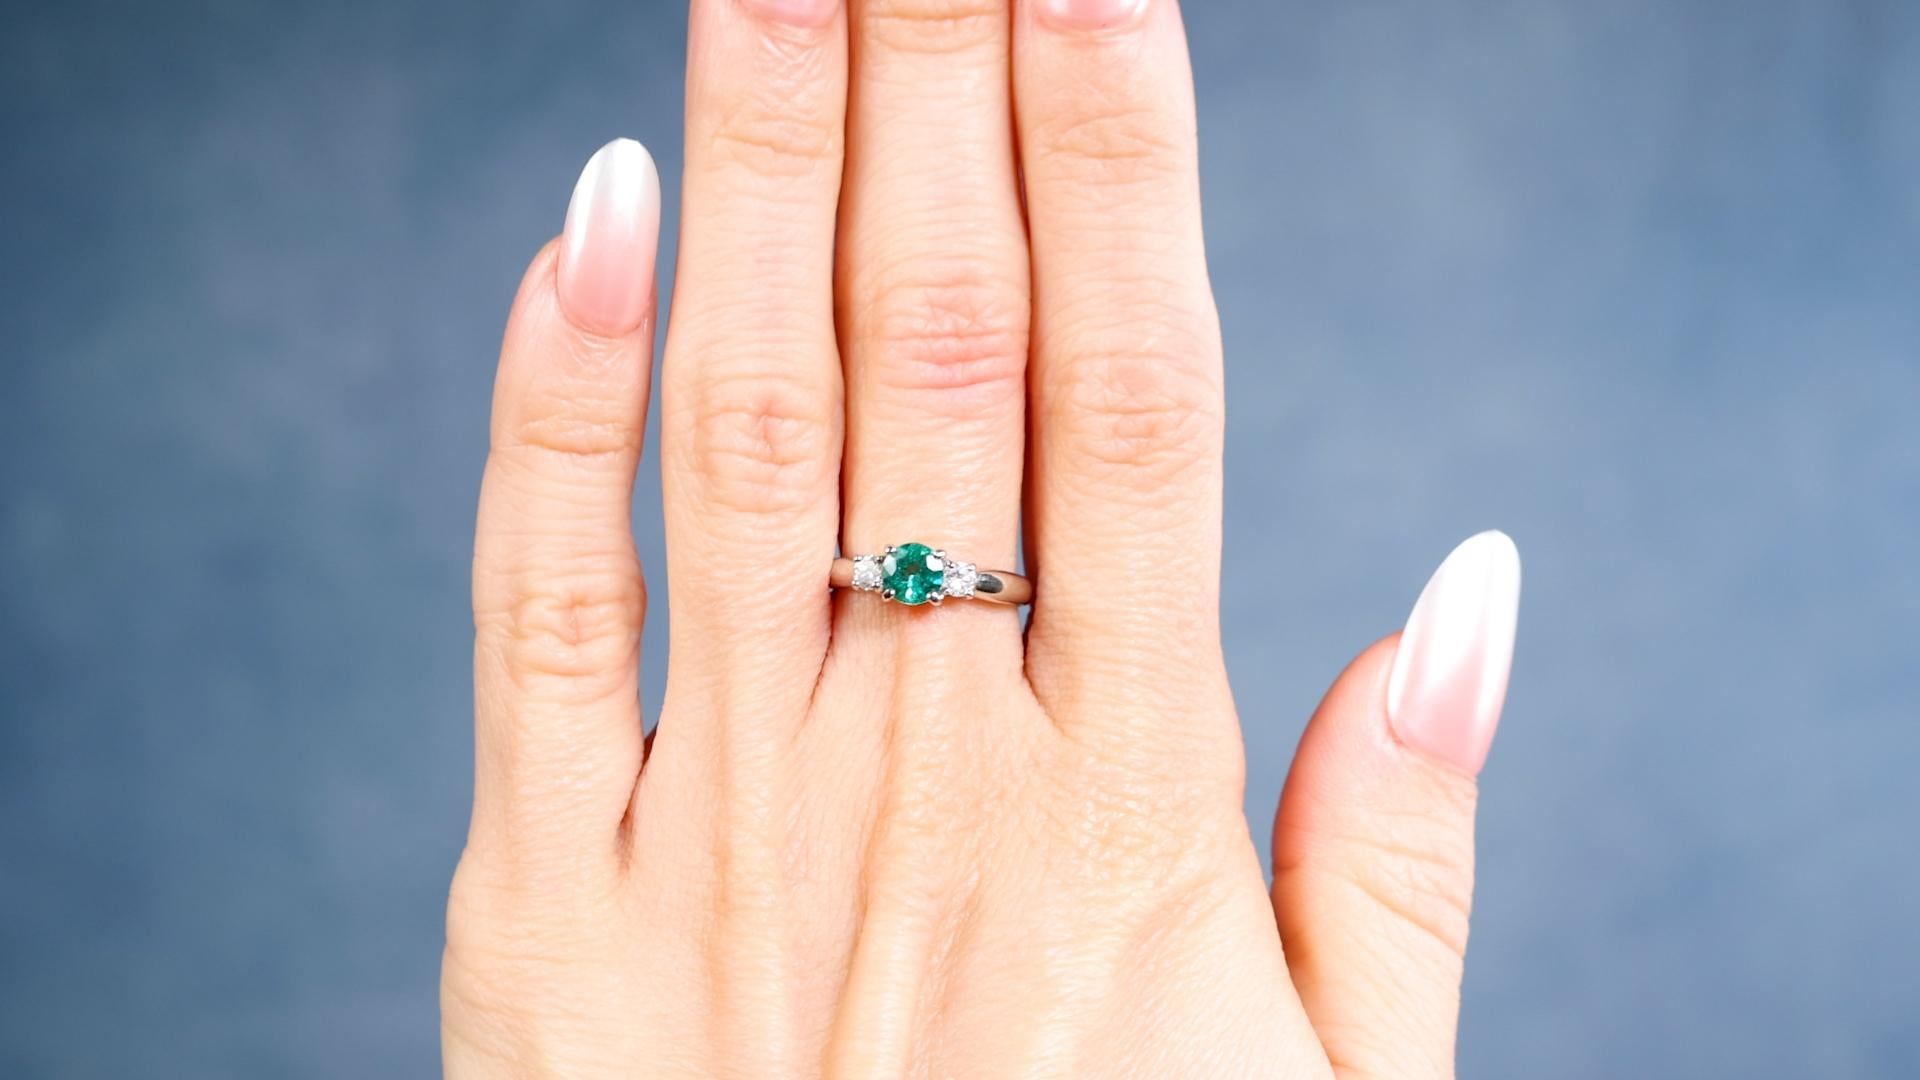 One Vintage Emerald Diamond Platinum Three Stone Ring. Featuring one round brilliant cut emerald of 0.43 carat. Accented by two round brilliant cut diamonds with a total weight of 0.20 carat, graded H-I color, SI clarity. Crafted in platinum with